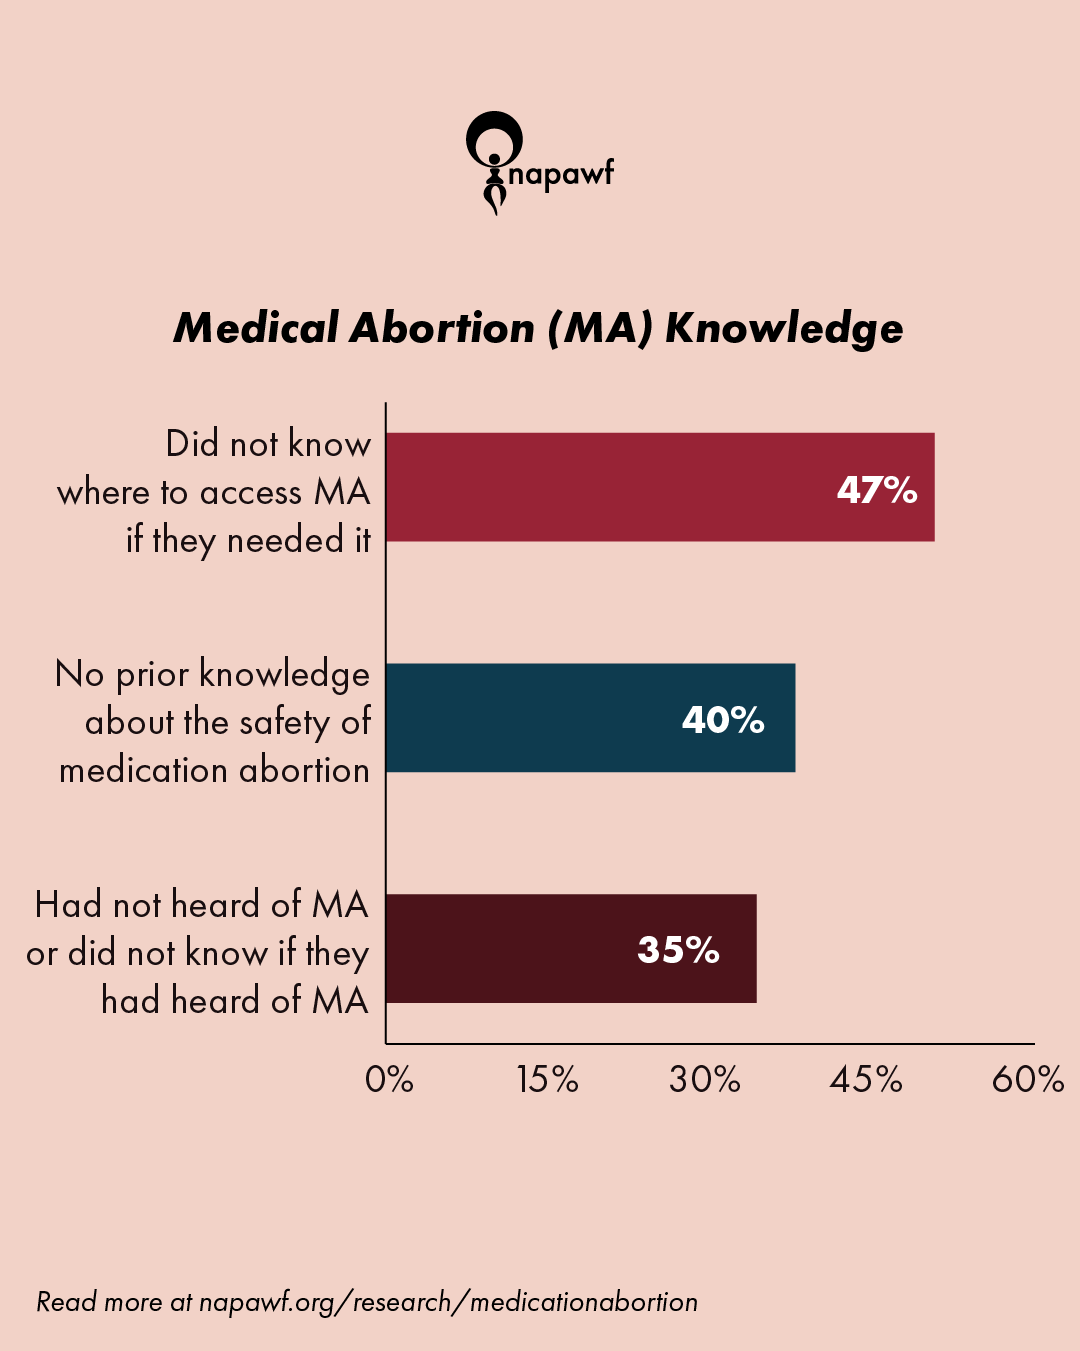 Medical Abortion (MA) Knowledge graph

47% did not know where to access MA if they needed it
40% no prior knowledge about the safety of medication abortion
35% had not heard of MA or did not know if they had heard of MA